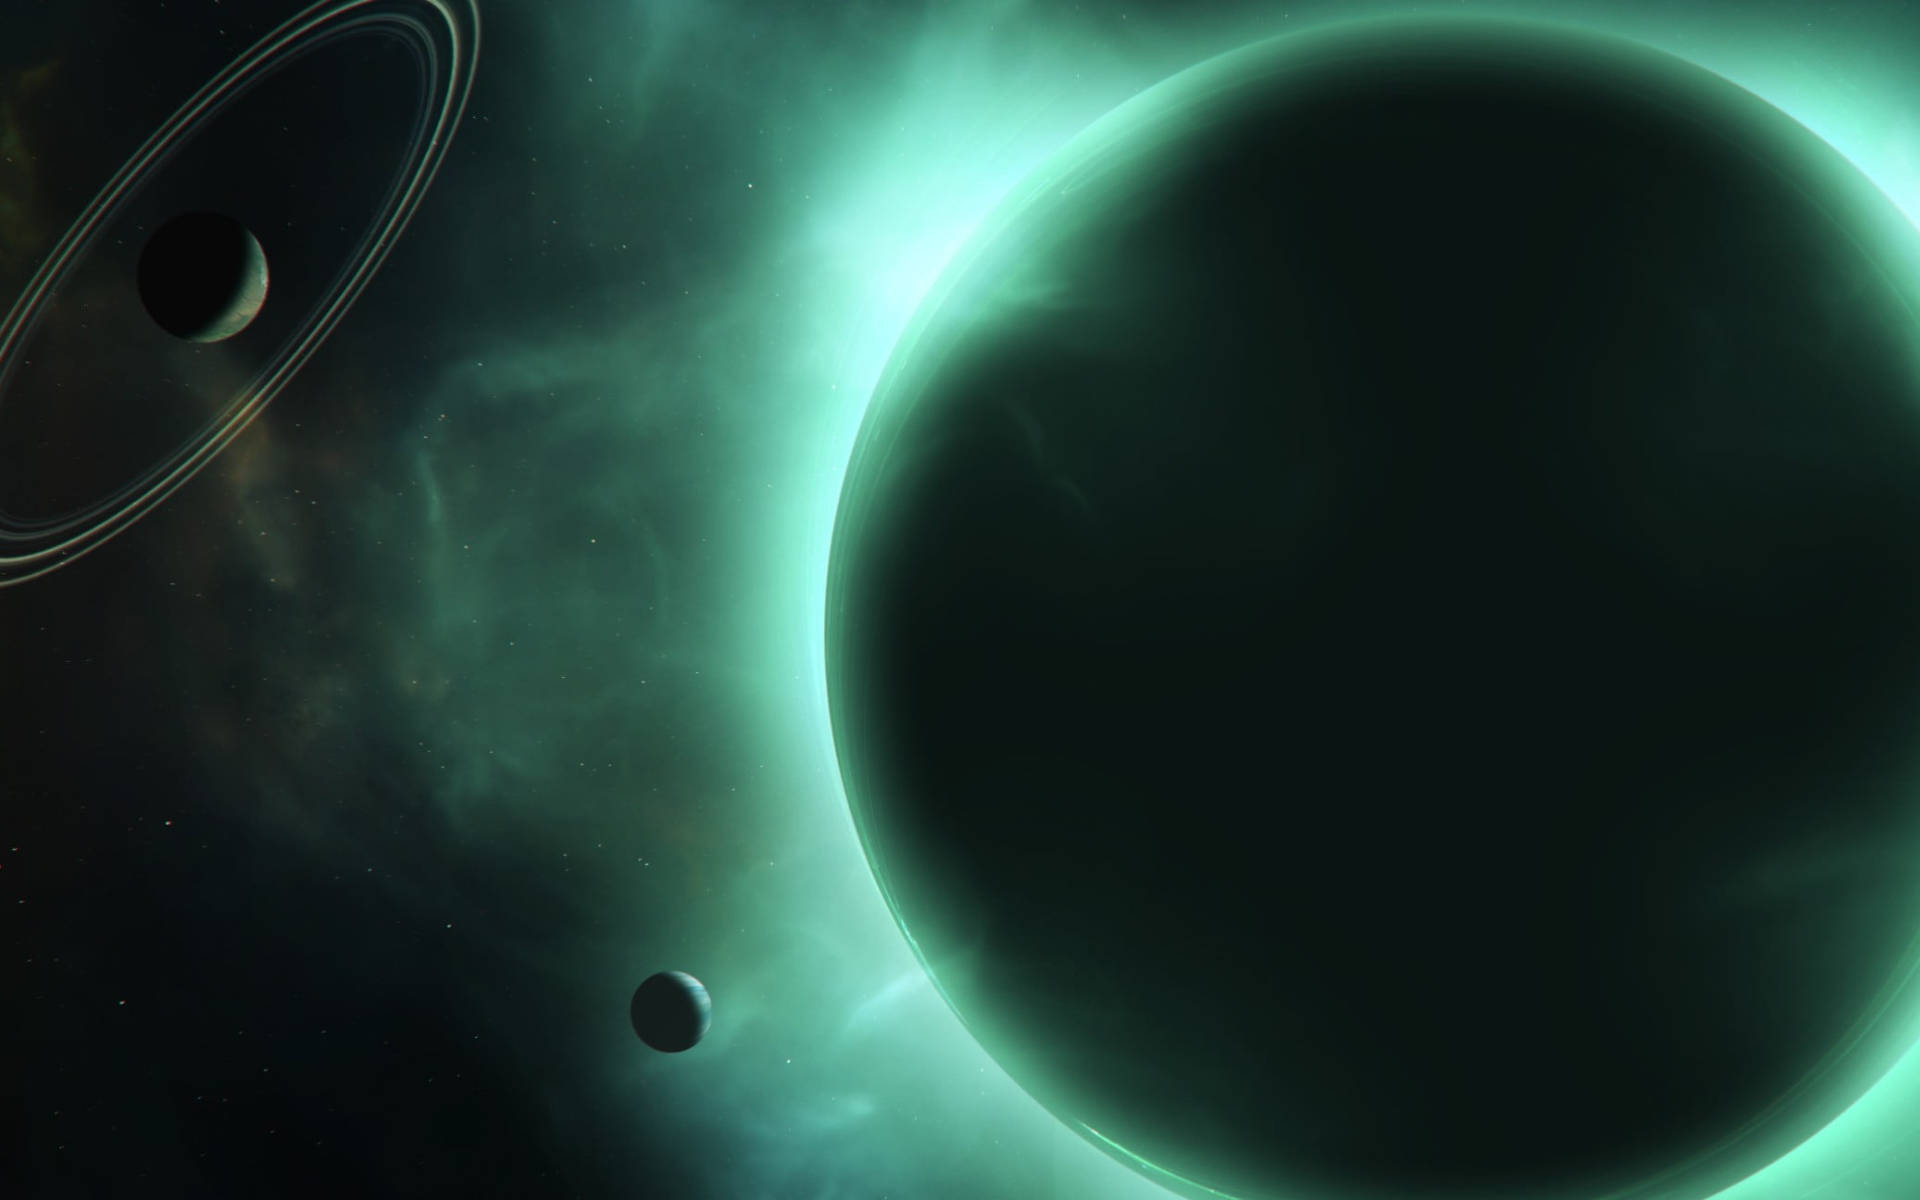 Black Planet In Bright Green Cosmos Background